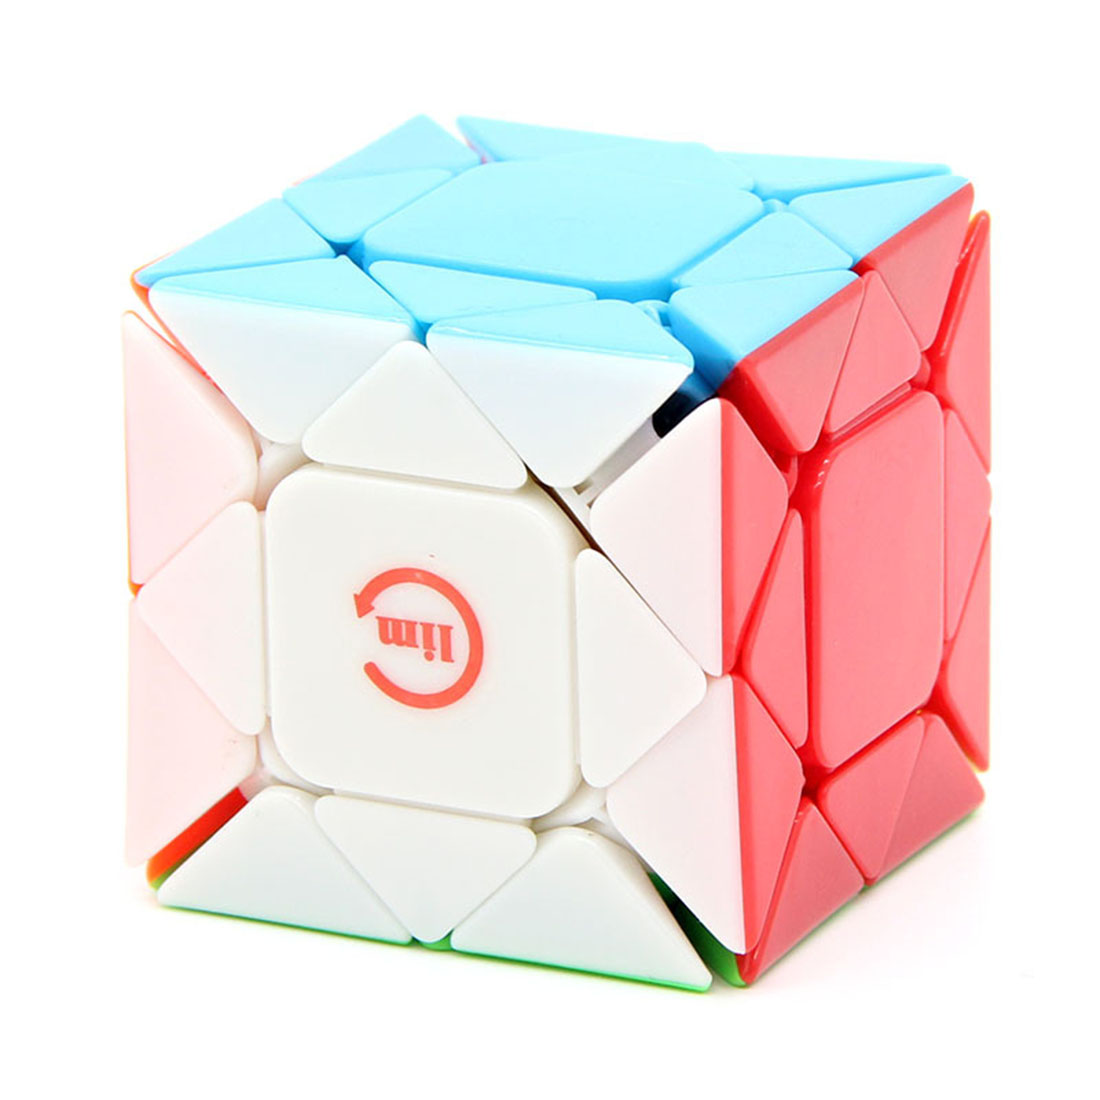 Funs LimCube Fission Skewb Speed Cube